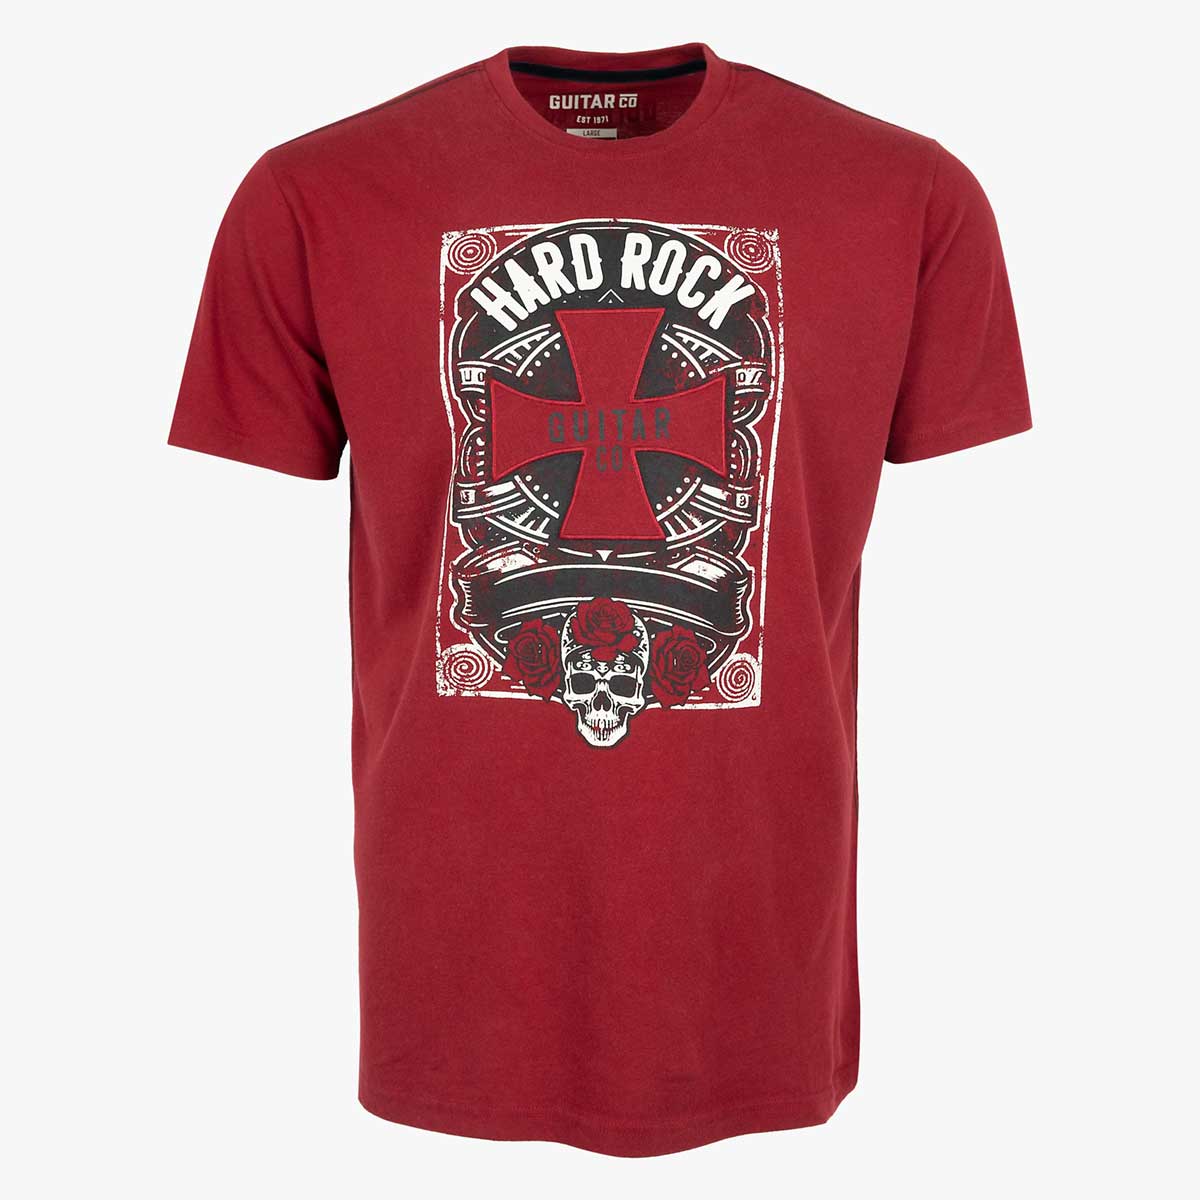 Guitar Company Adult Fit Tee in Red Cross Skull Roses image number 2